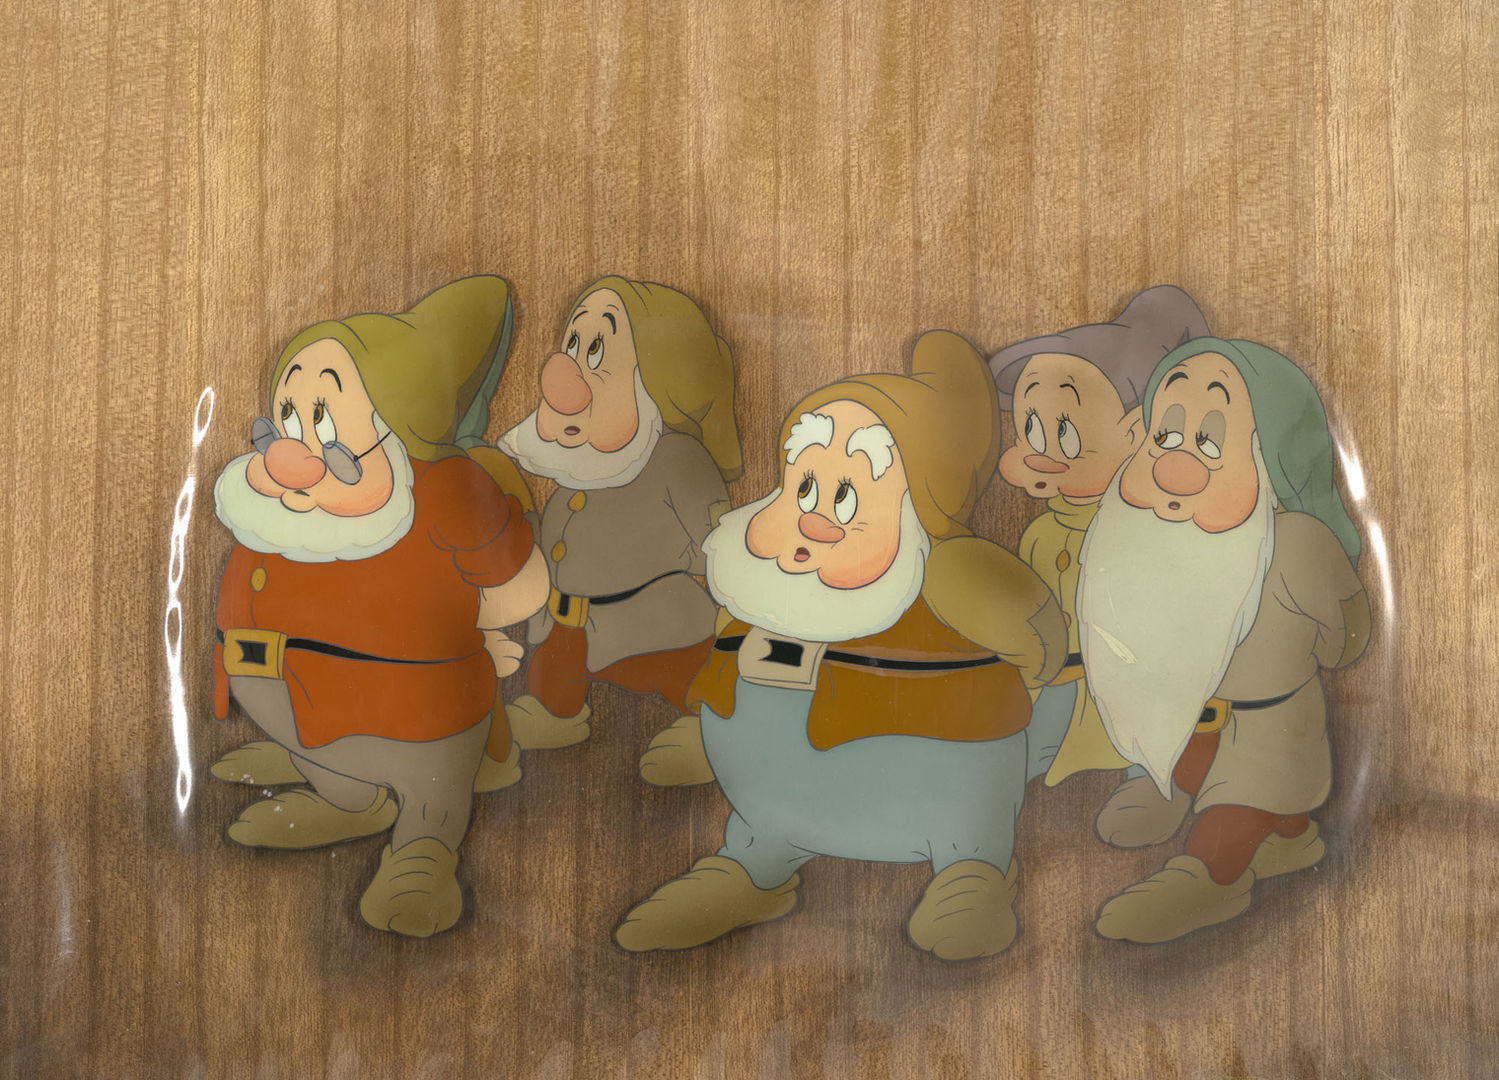 Five dwarves look up and to the left on a wooden background.